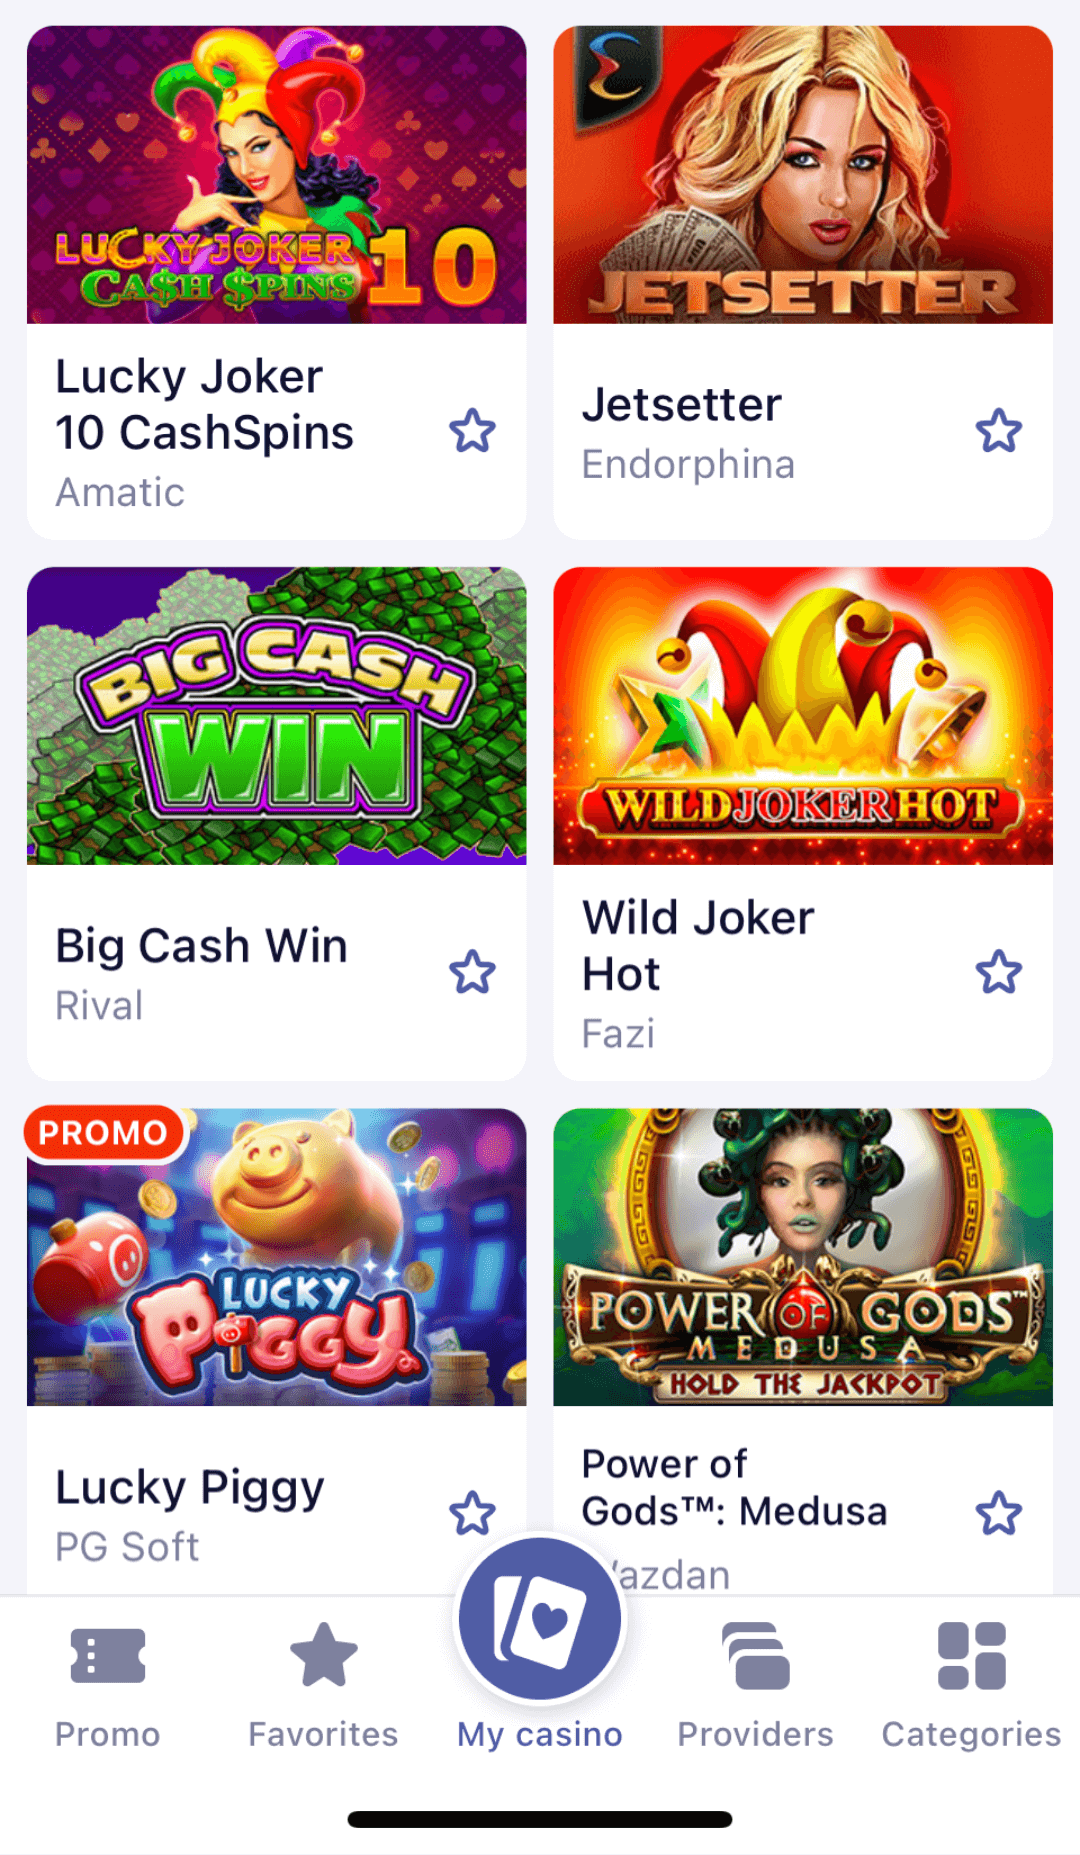 The SapphireBet app offers Indian players a casino section with hundreds of different entertainment options